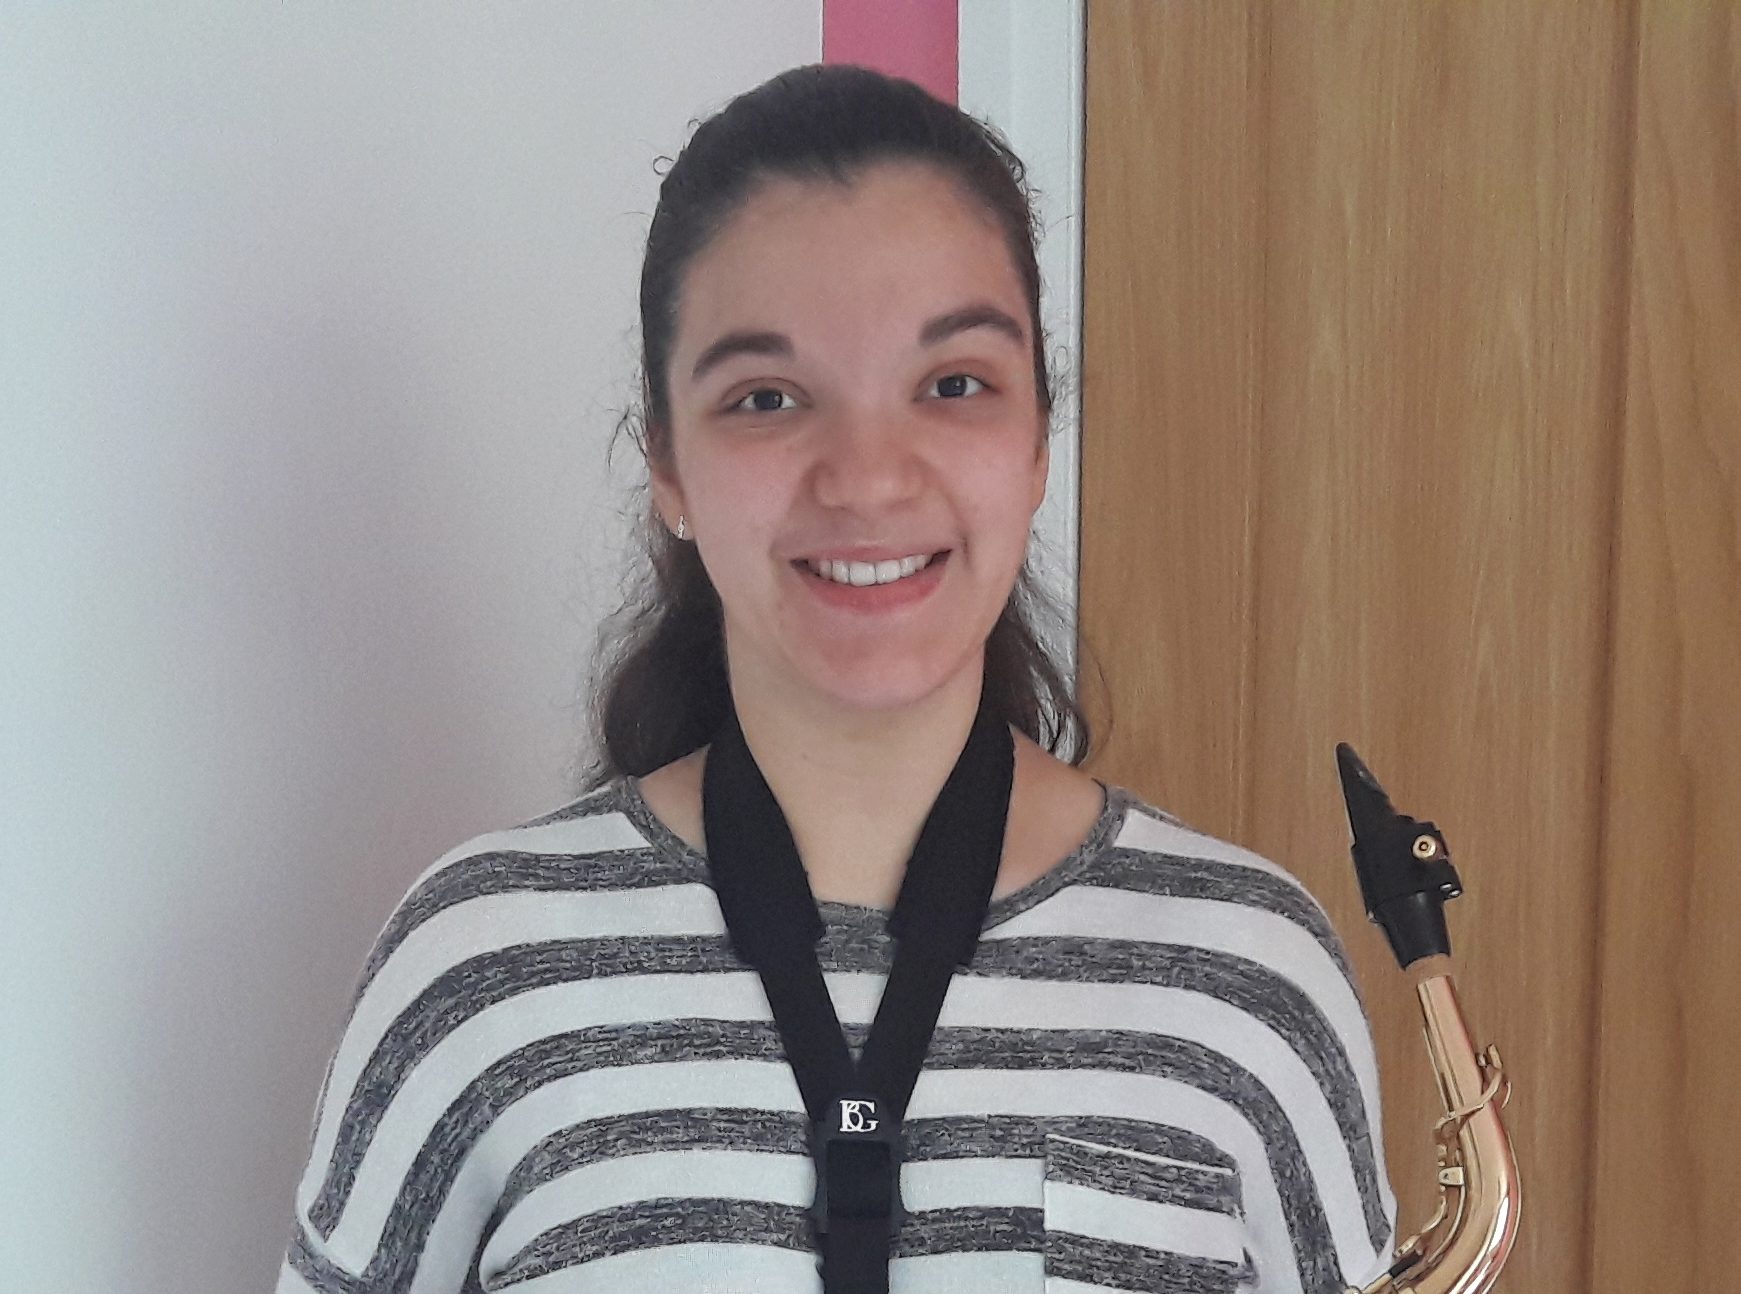 Emily Manson, 18, from Aberdeen, was one of 22 young musicians from across Scotland who collaborated on an RSNO composition during lockdown.